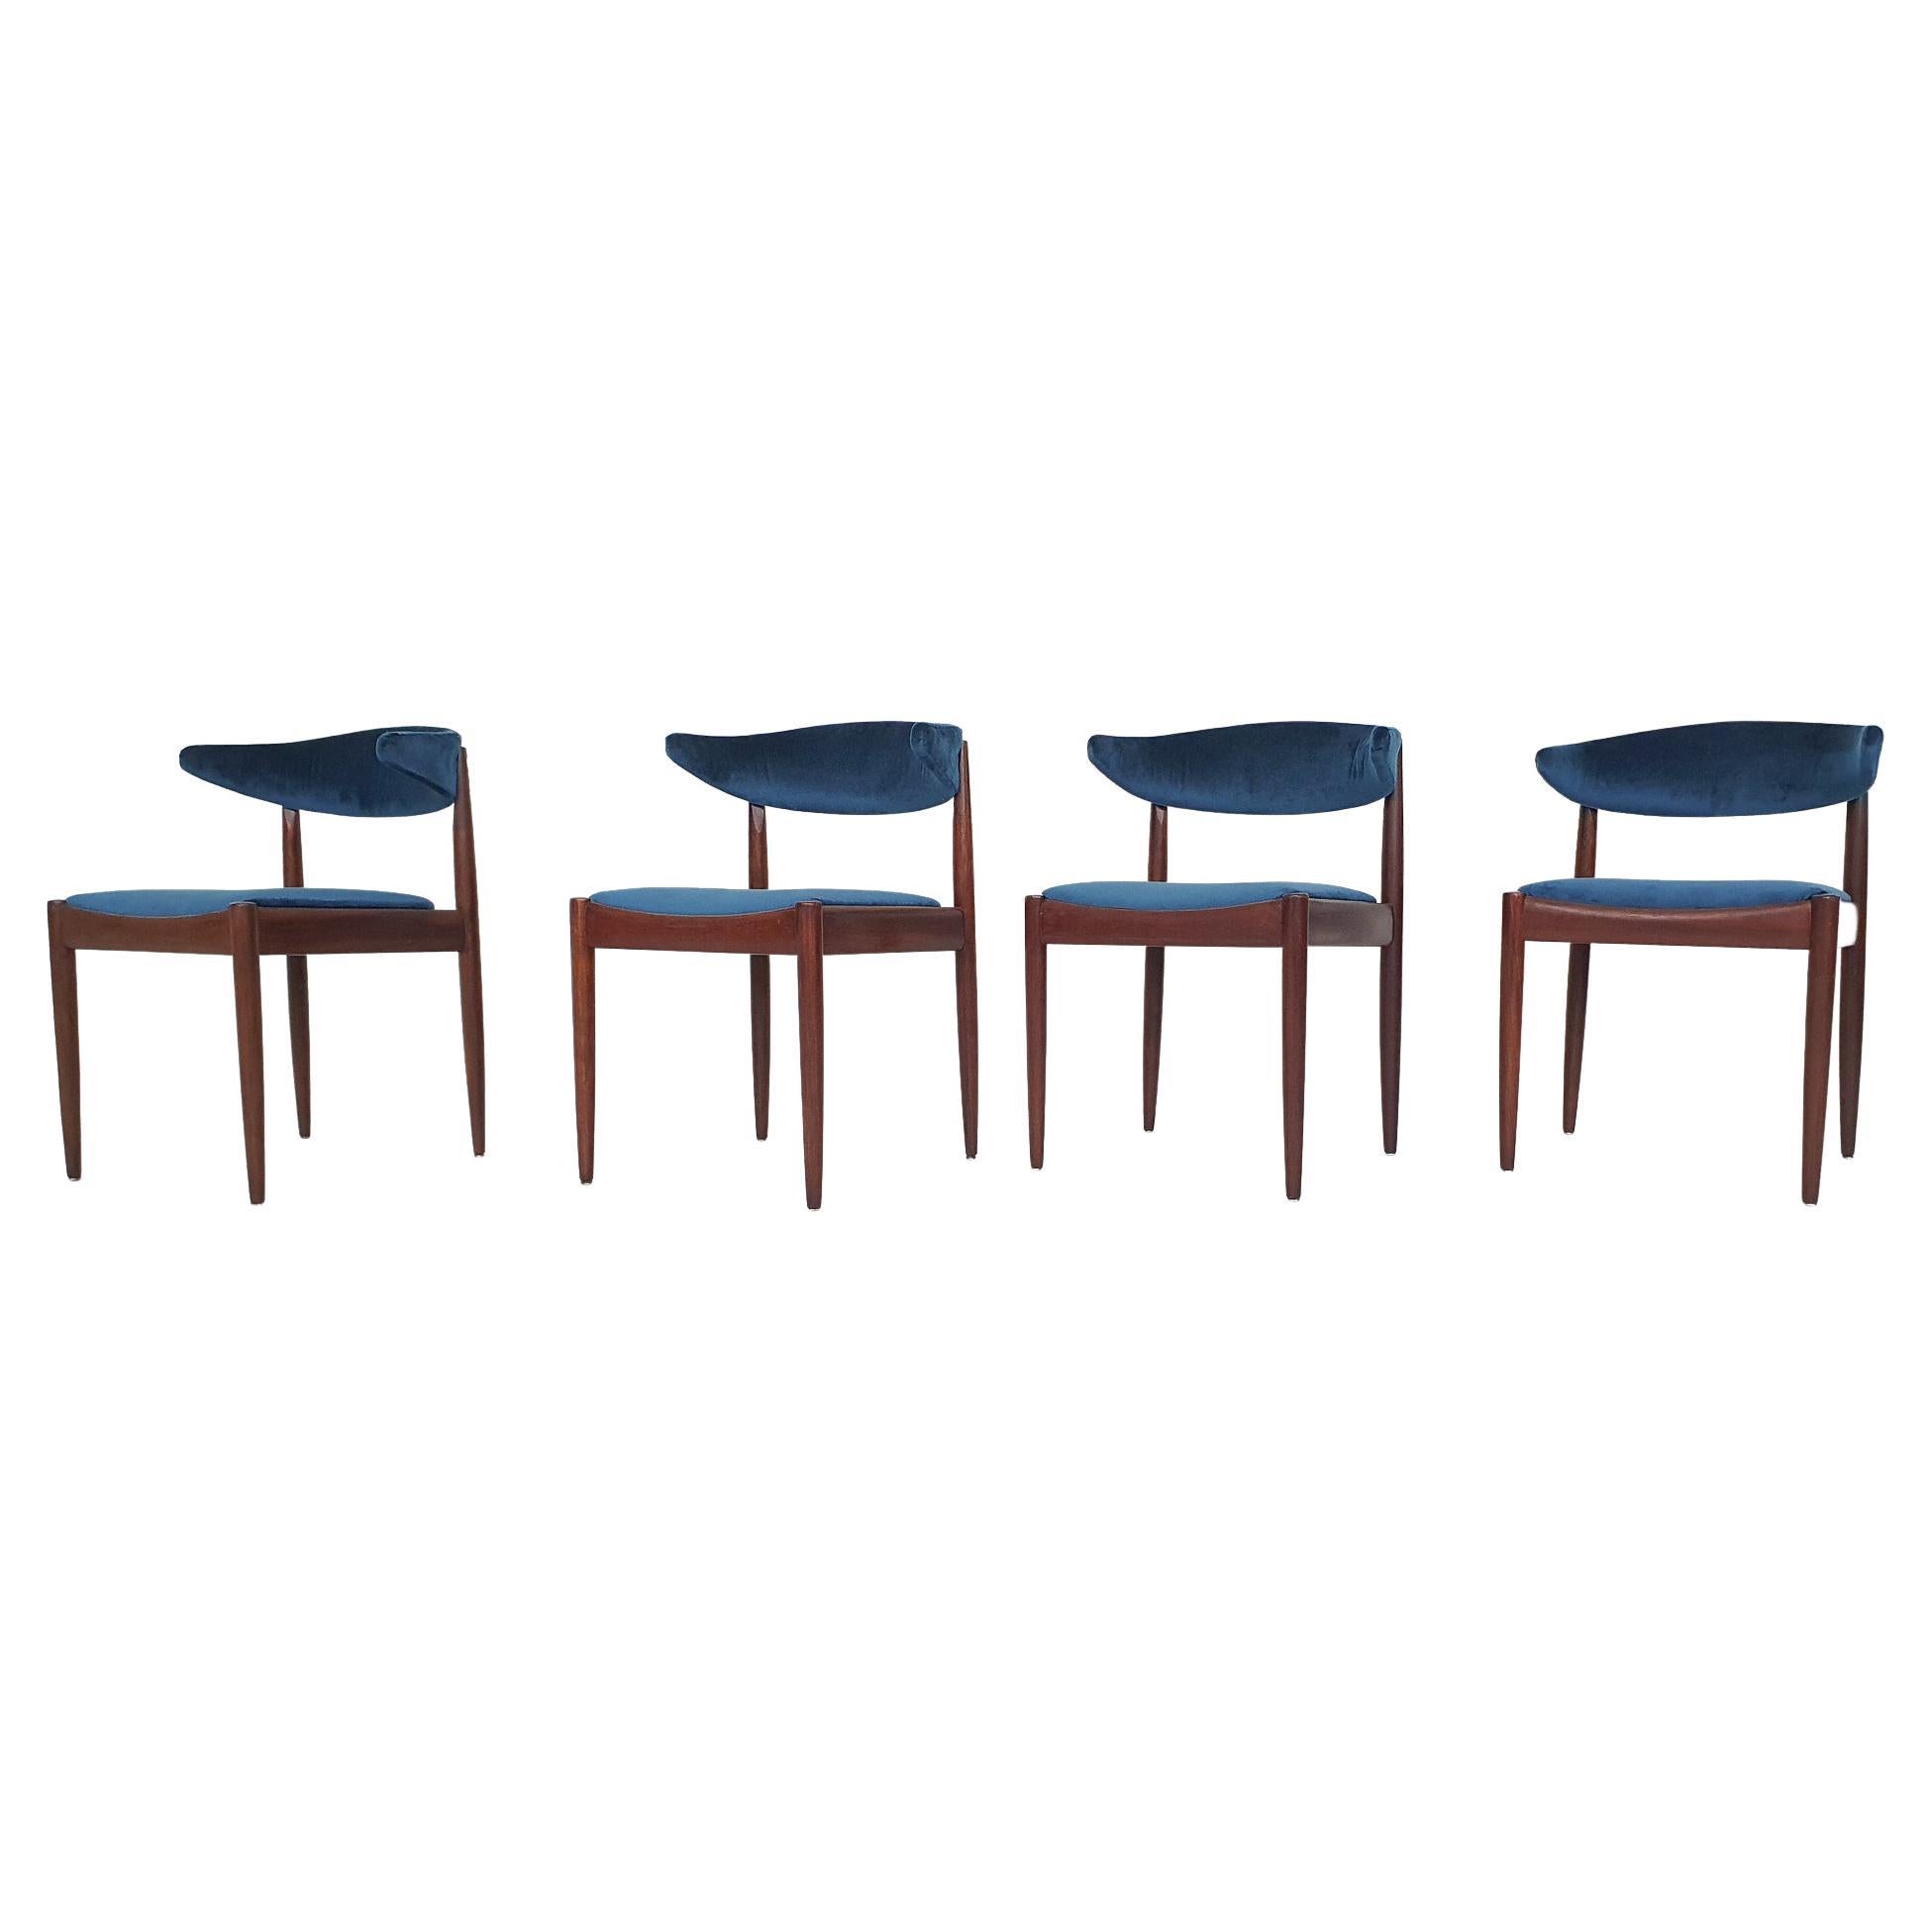 Set of Four Rosewood and Velvet Dining Chairs by Topform, the Netherlands 1950's